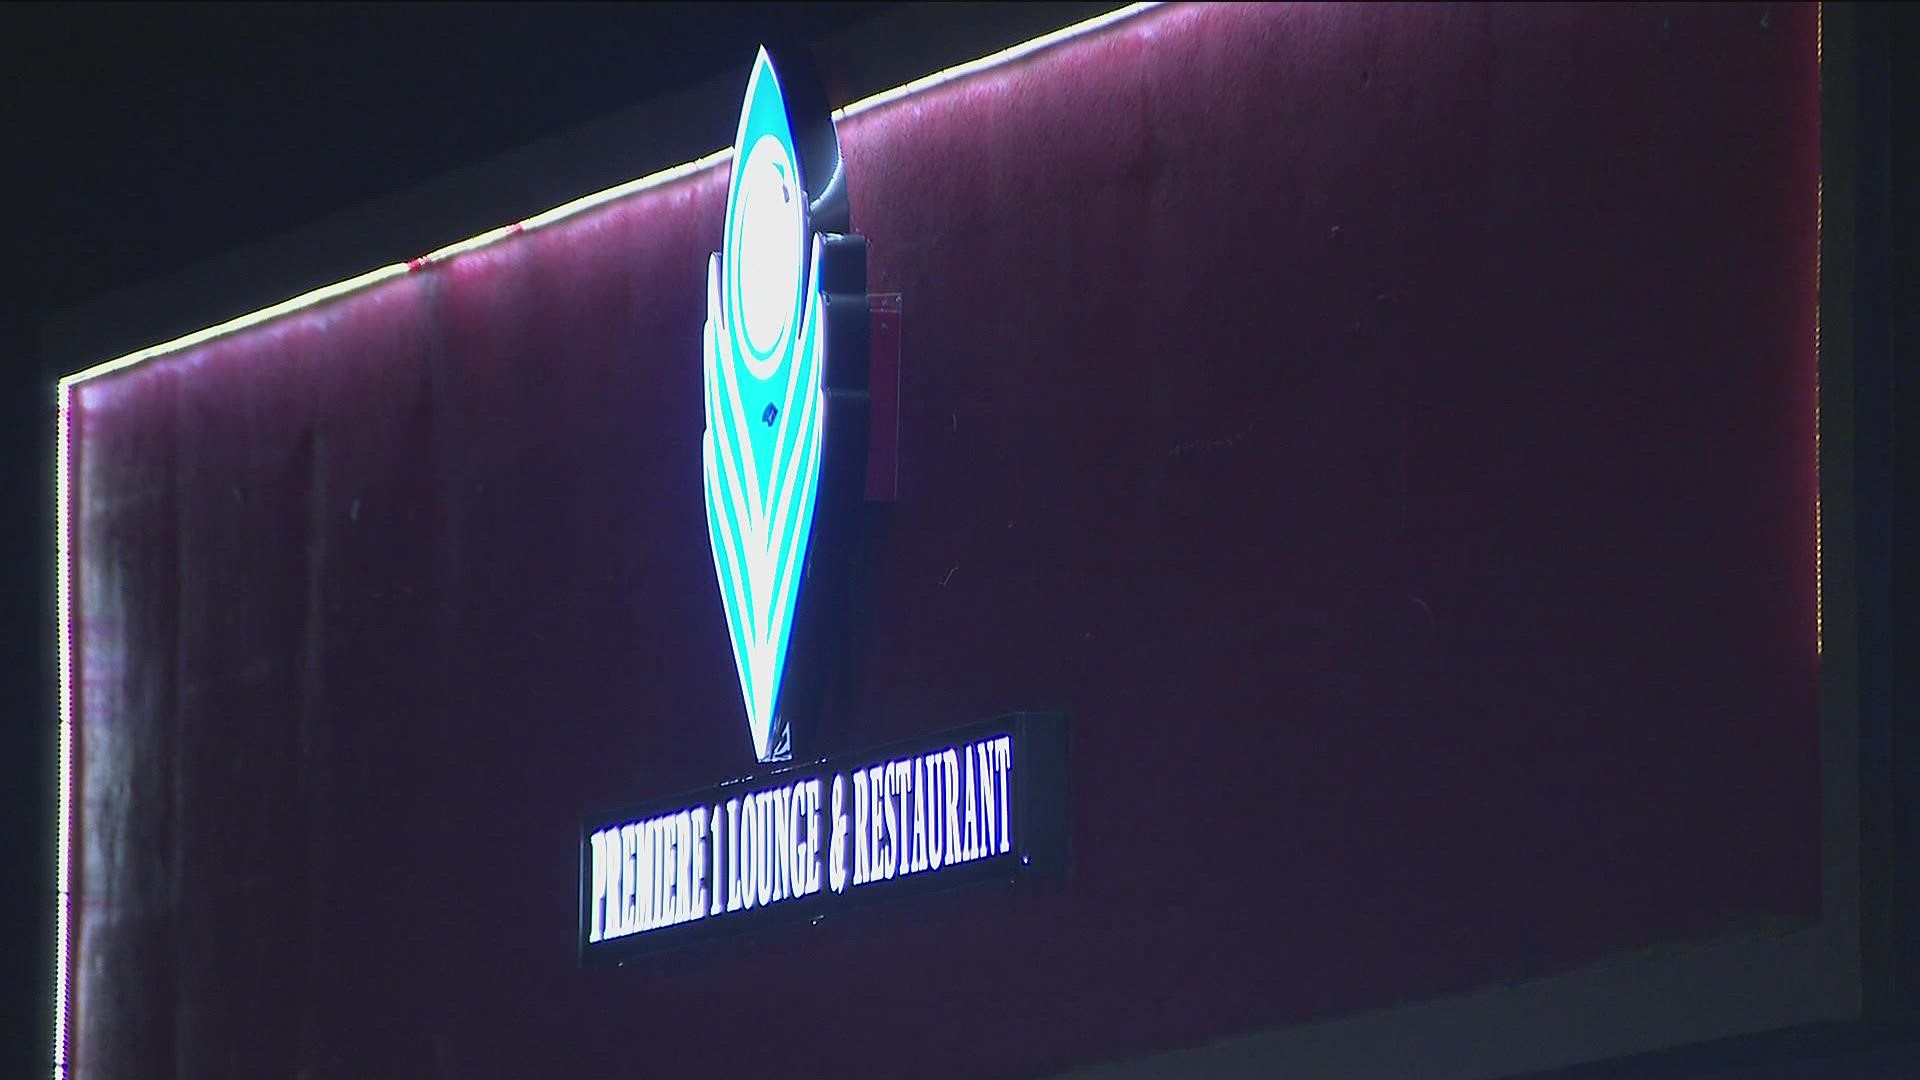 The department said it happened following an argument at the Cosmopolitan Premier Lounge off Glenwood Road in Decatur.